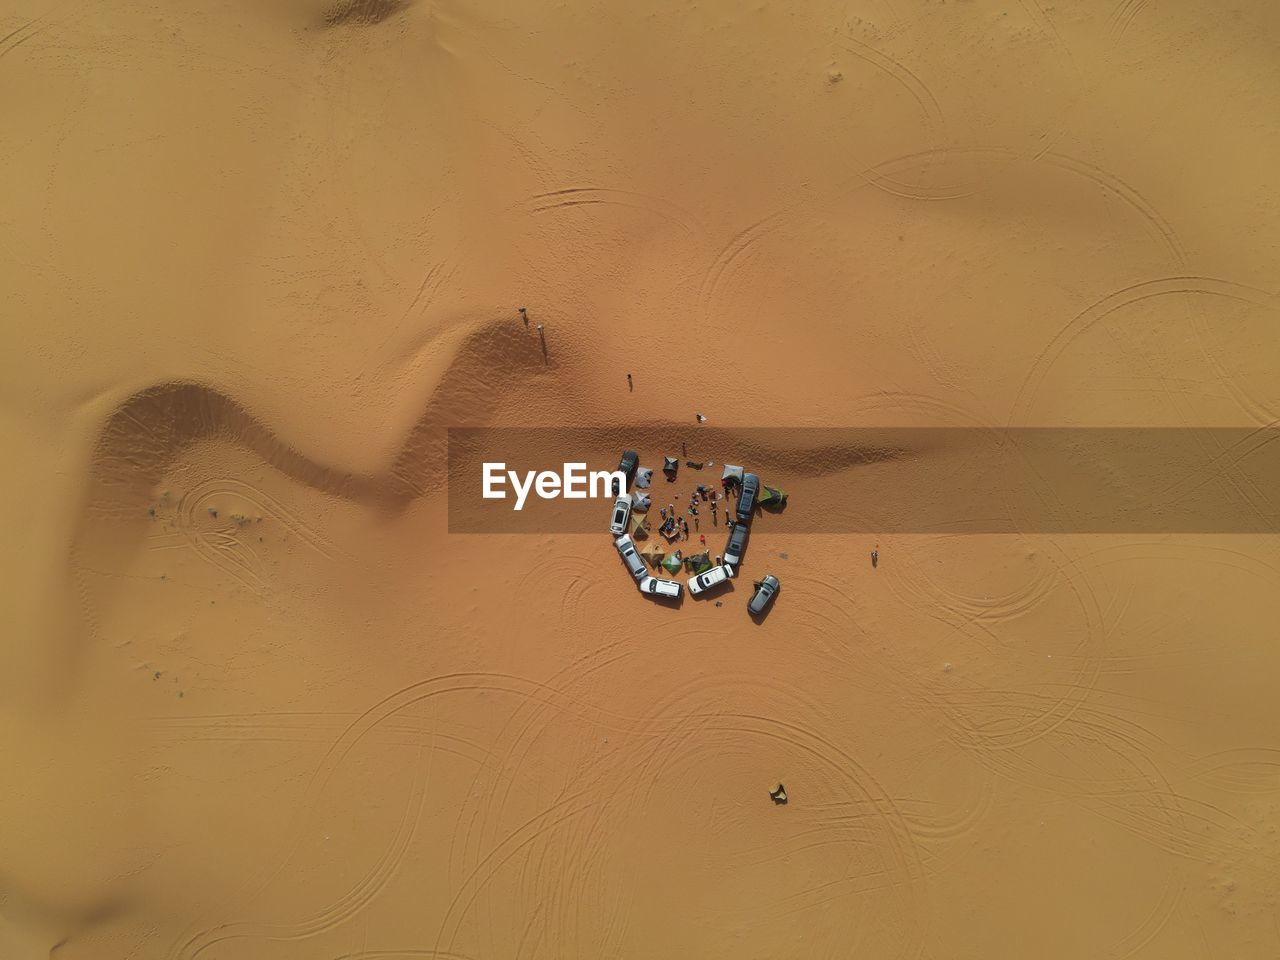 High angle view of a desert